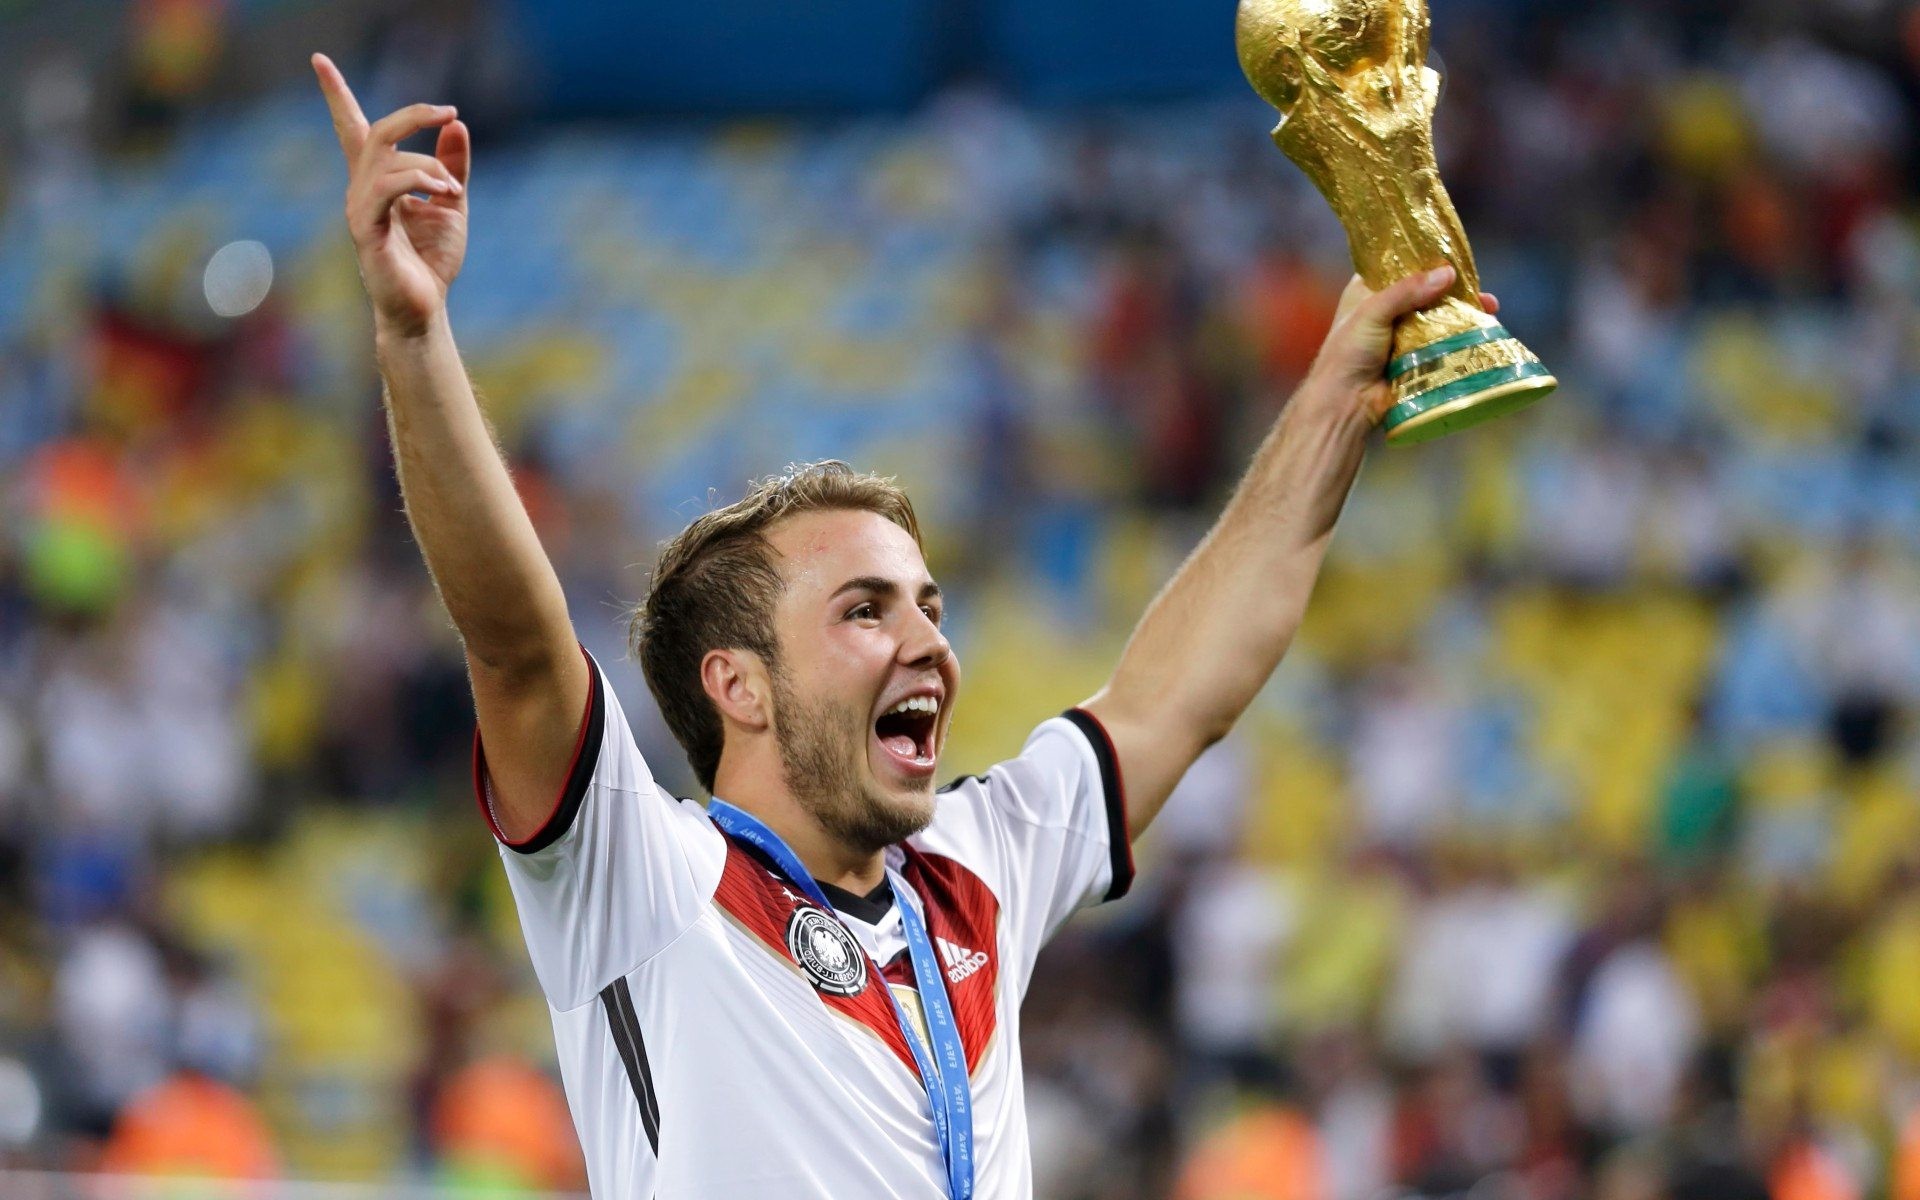 People 1920x1200 Mario Götze soccer Germany FIFA World Cup arms up sport men